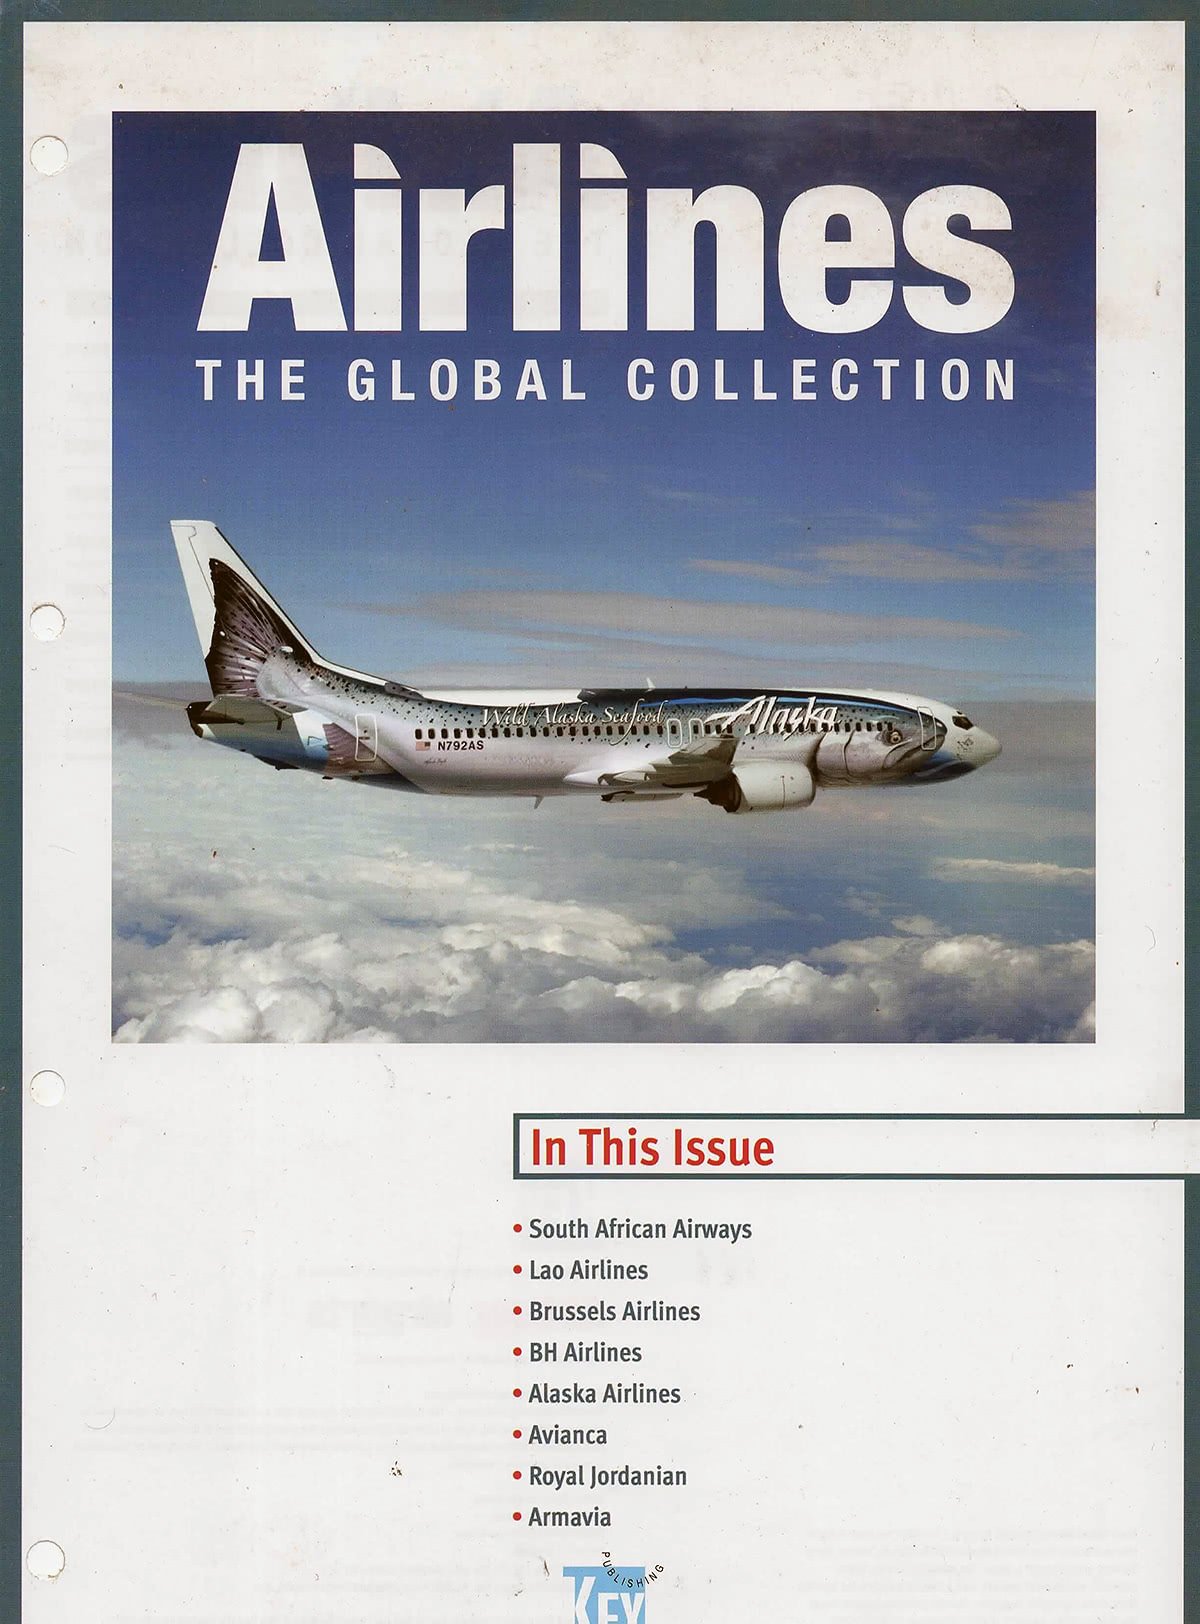 Airlines - The Global Collection